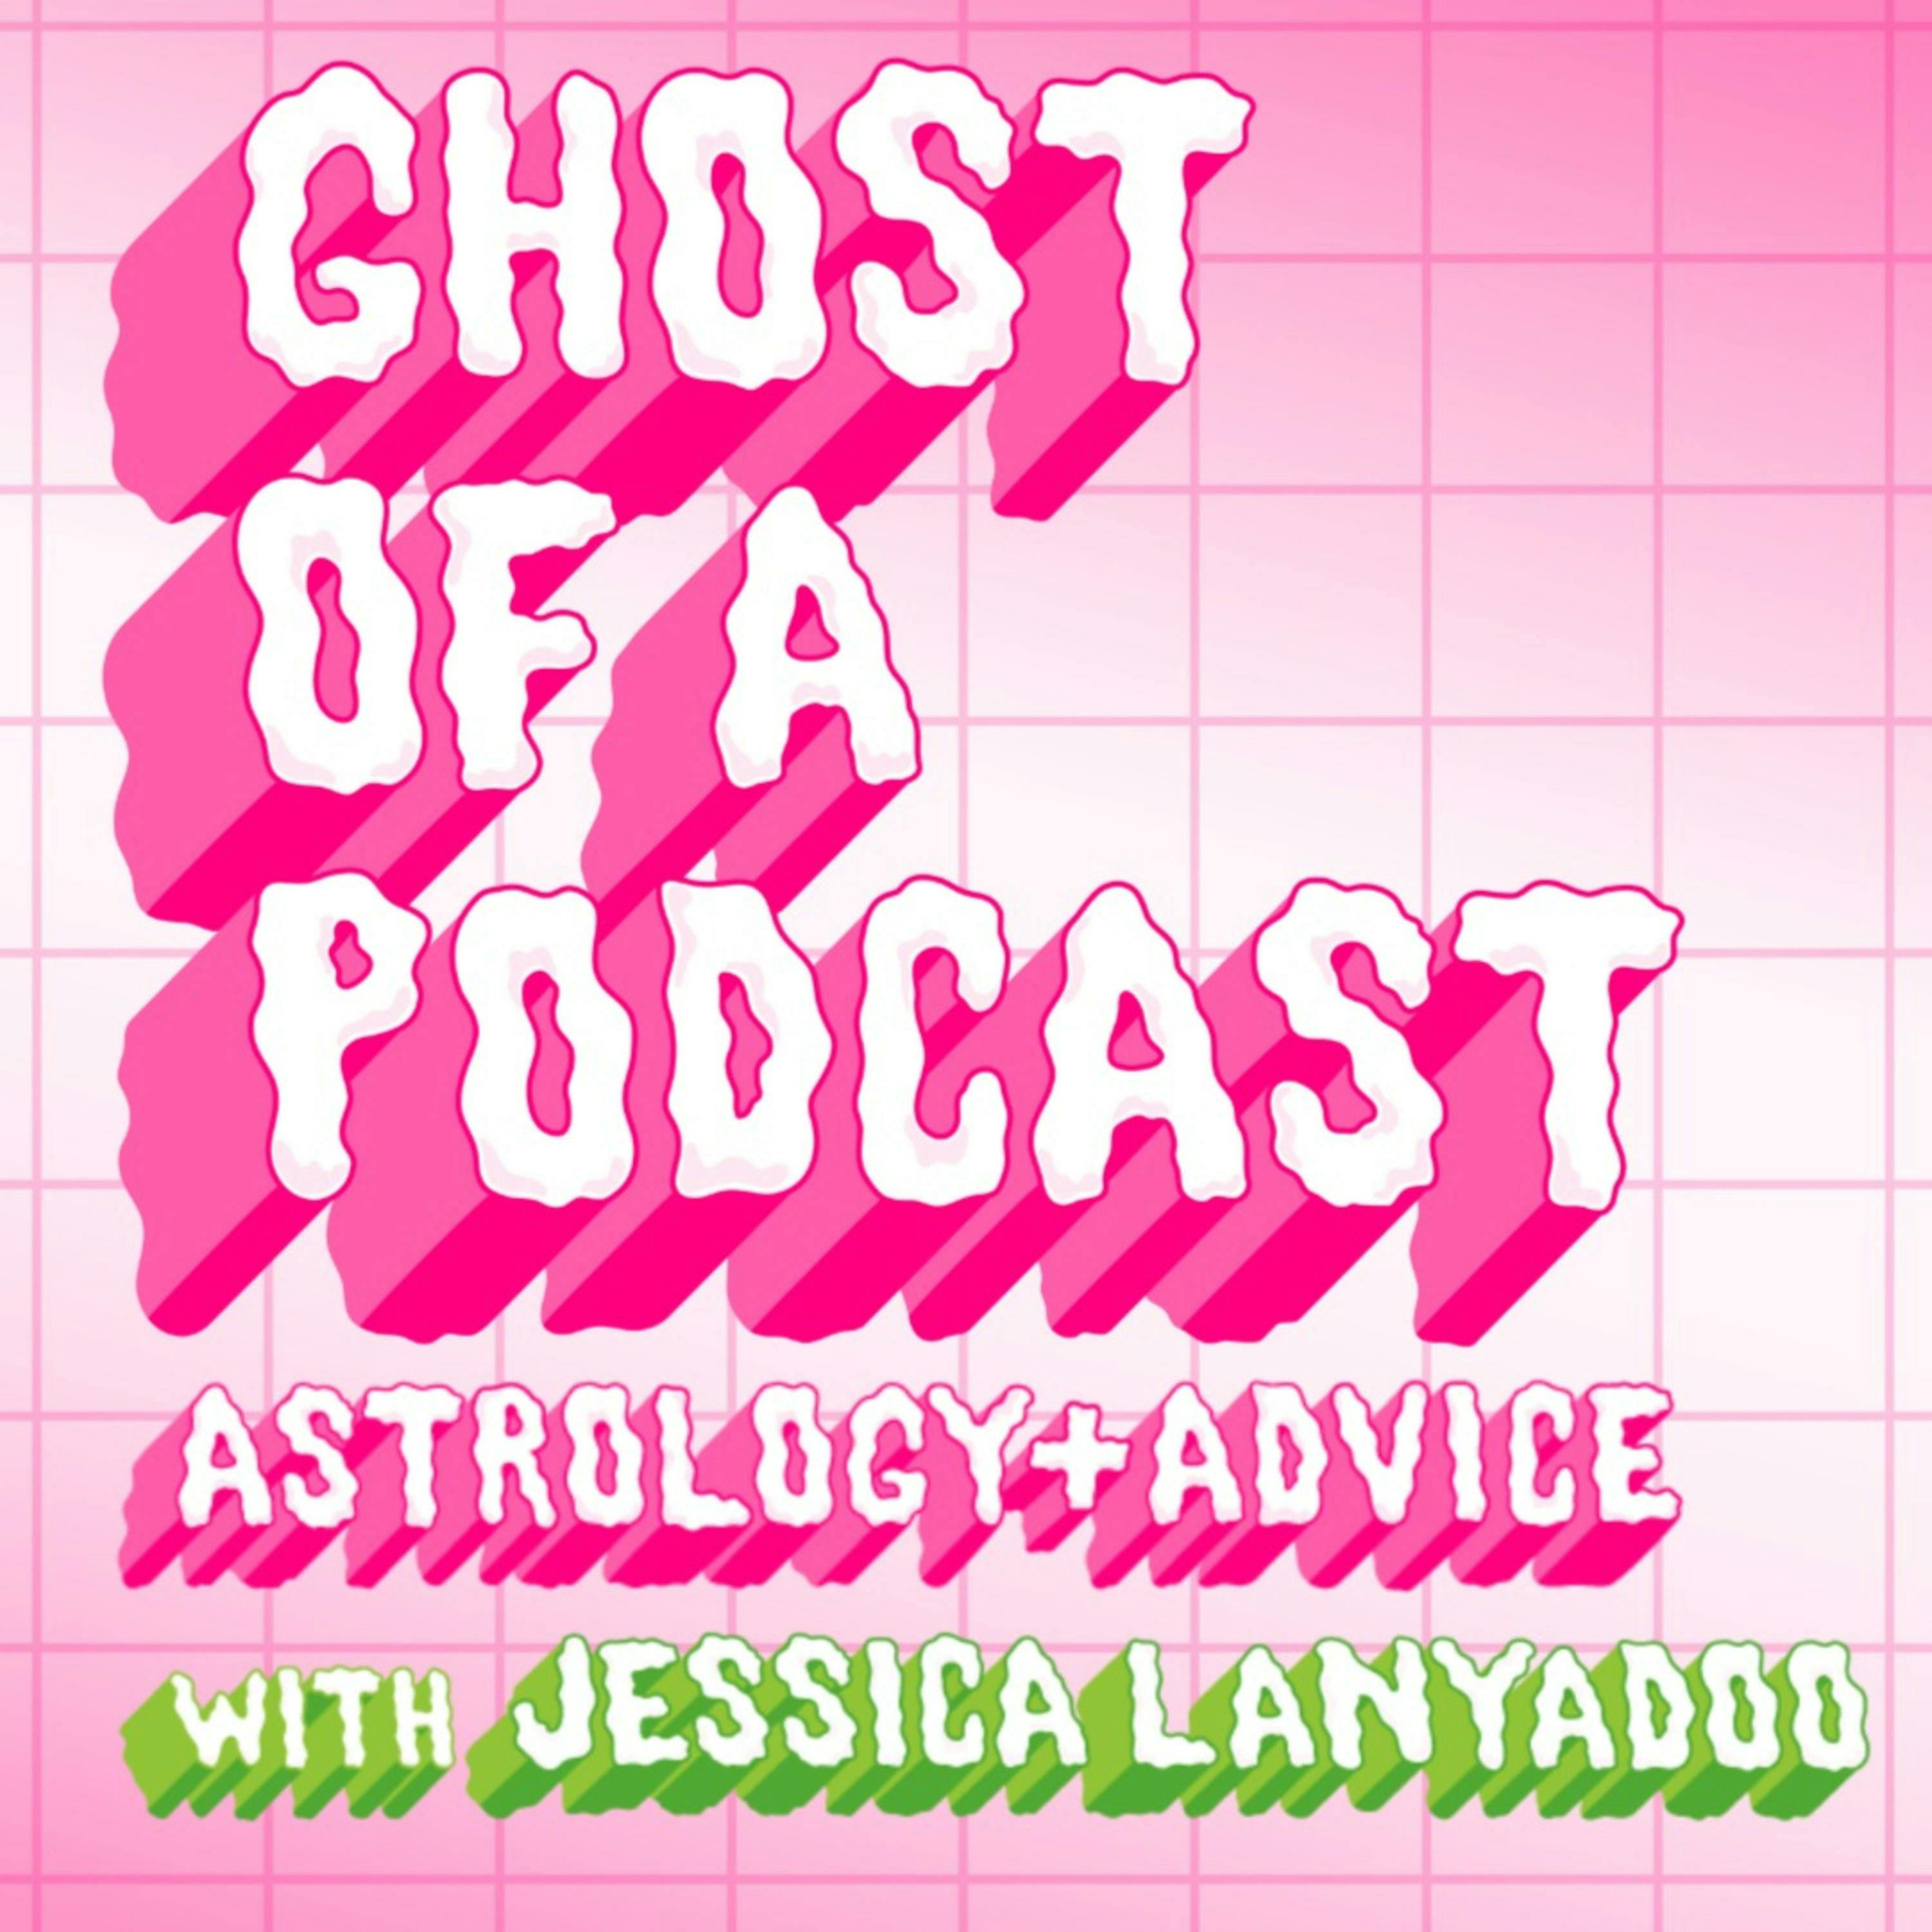 142: The End of the World + Astrology